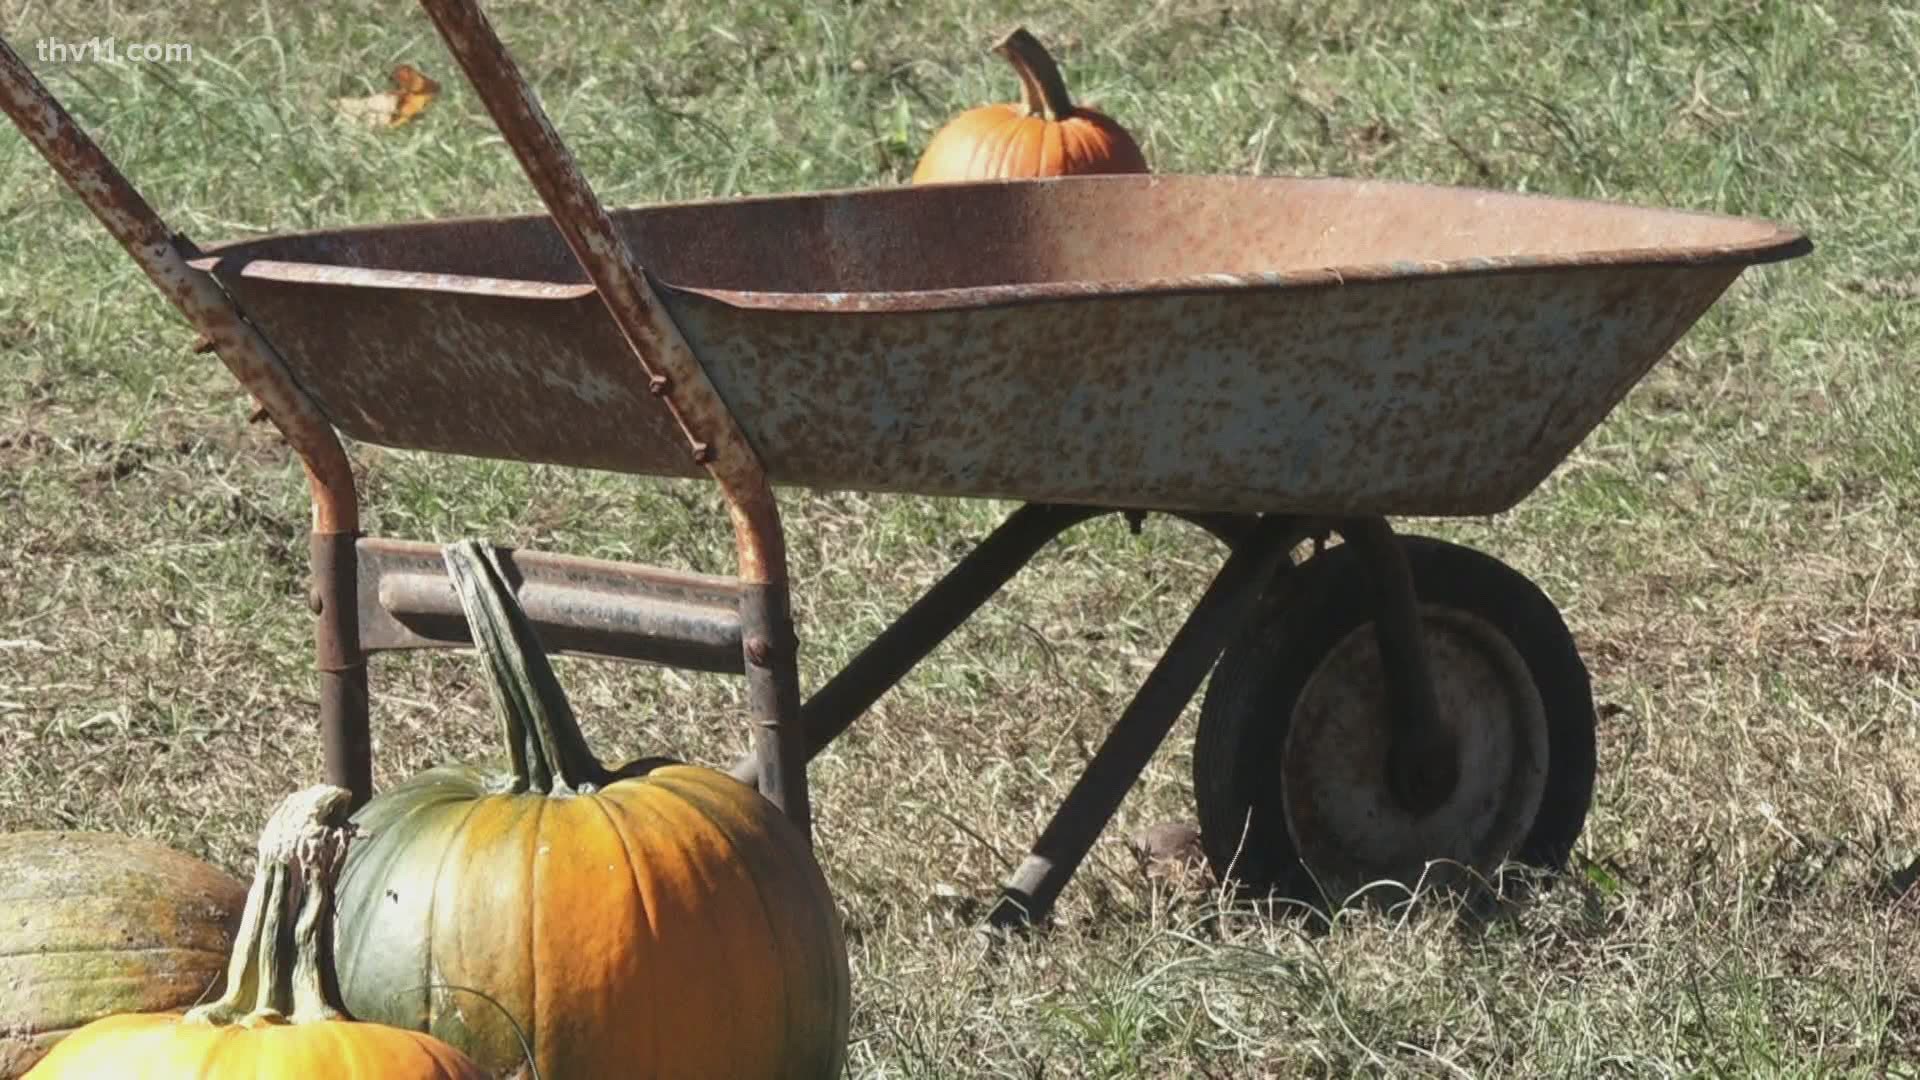 Whether it’s to carve on Halloween day or to keep out with your fall décor, the season has been so busy that some farms don’t have many pumpkins left on the vine.